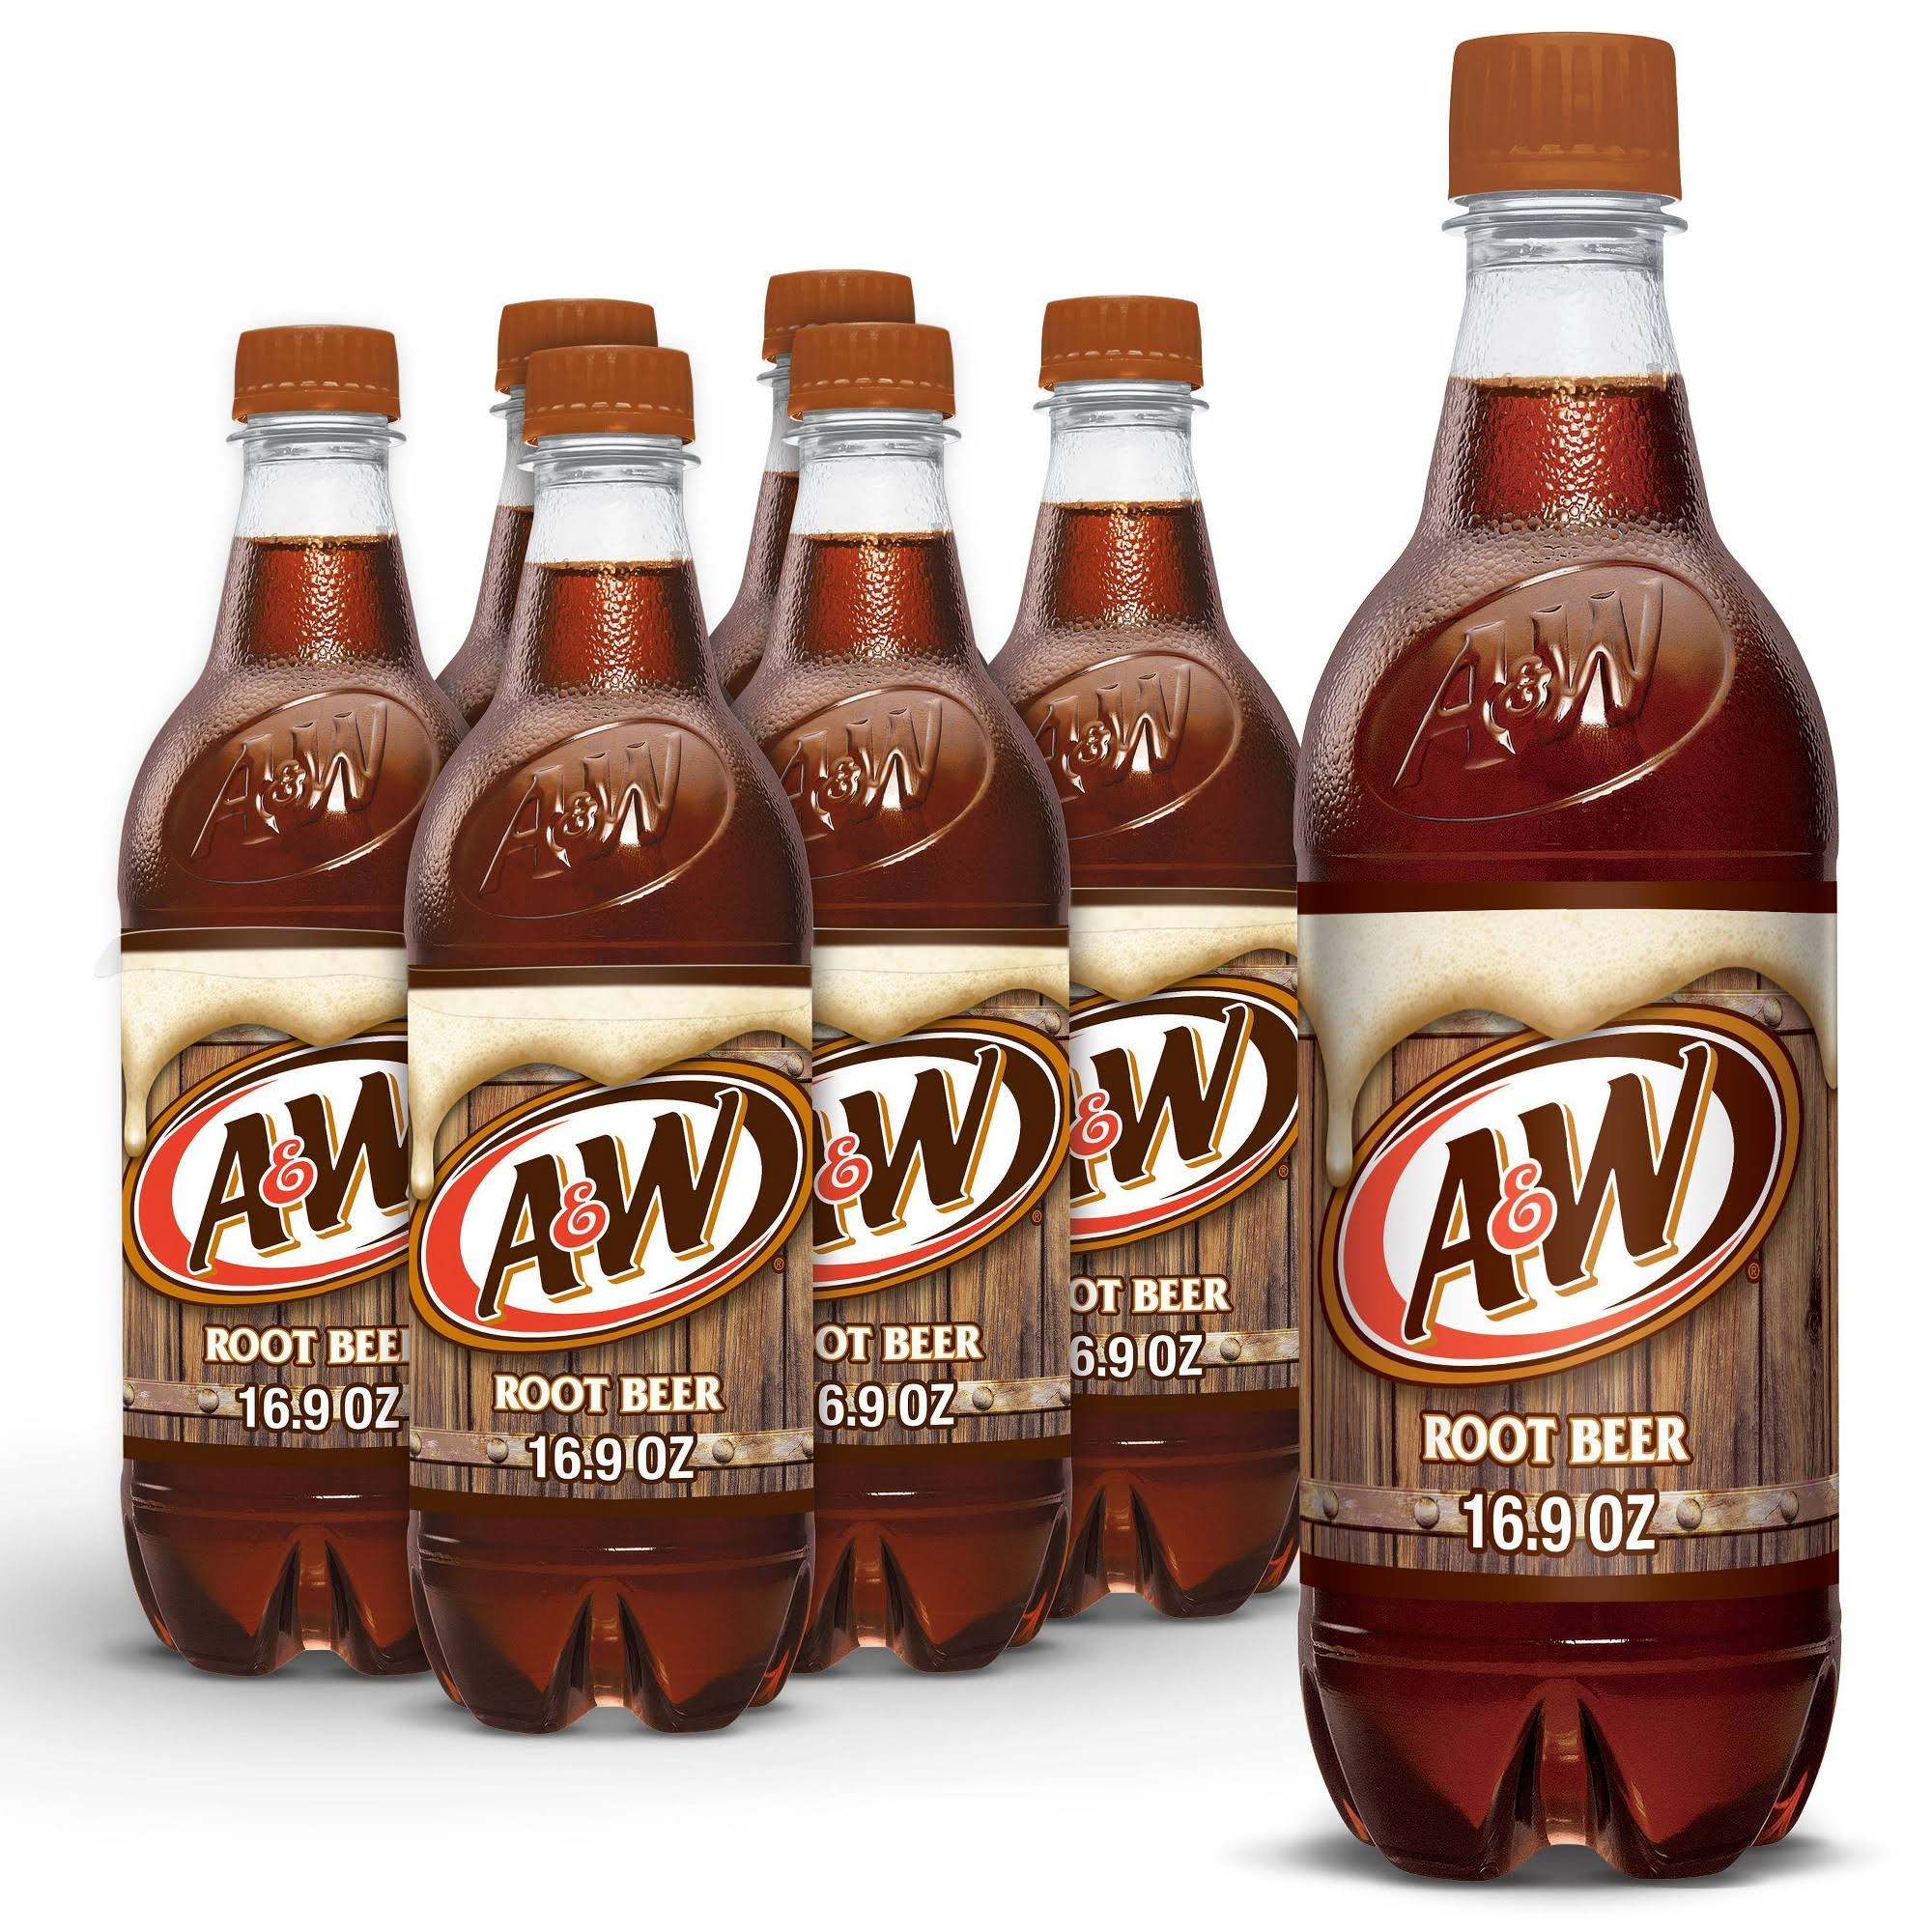 7 Up A and W Rootbeer - 16.91oz, 24pk